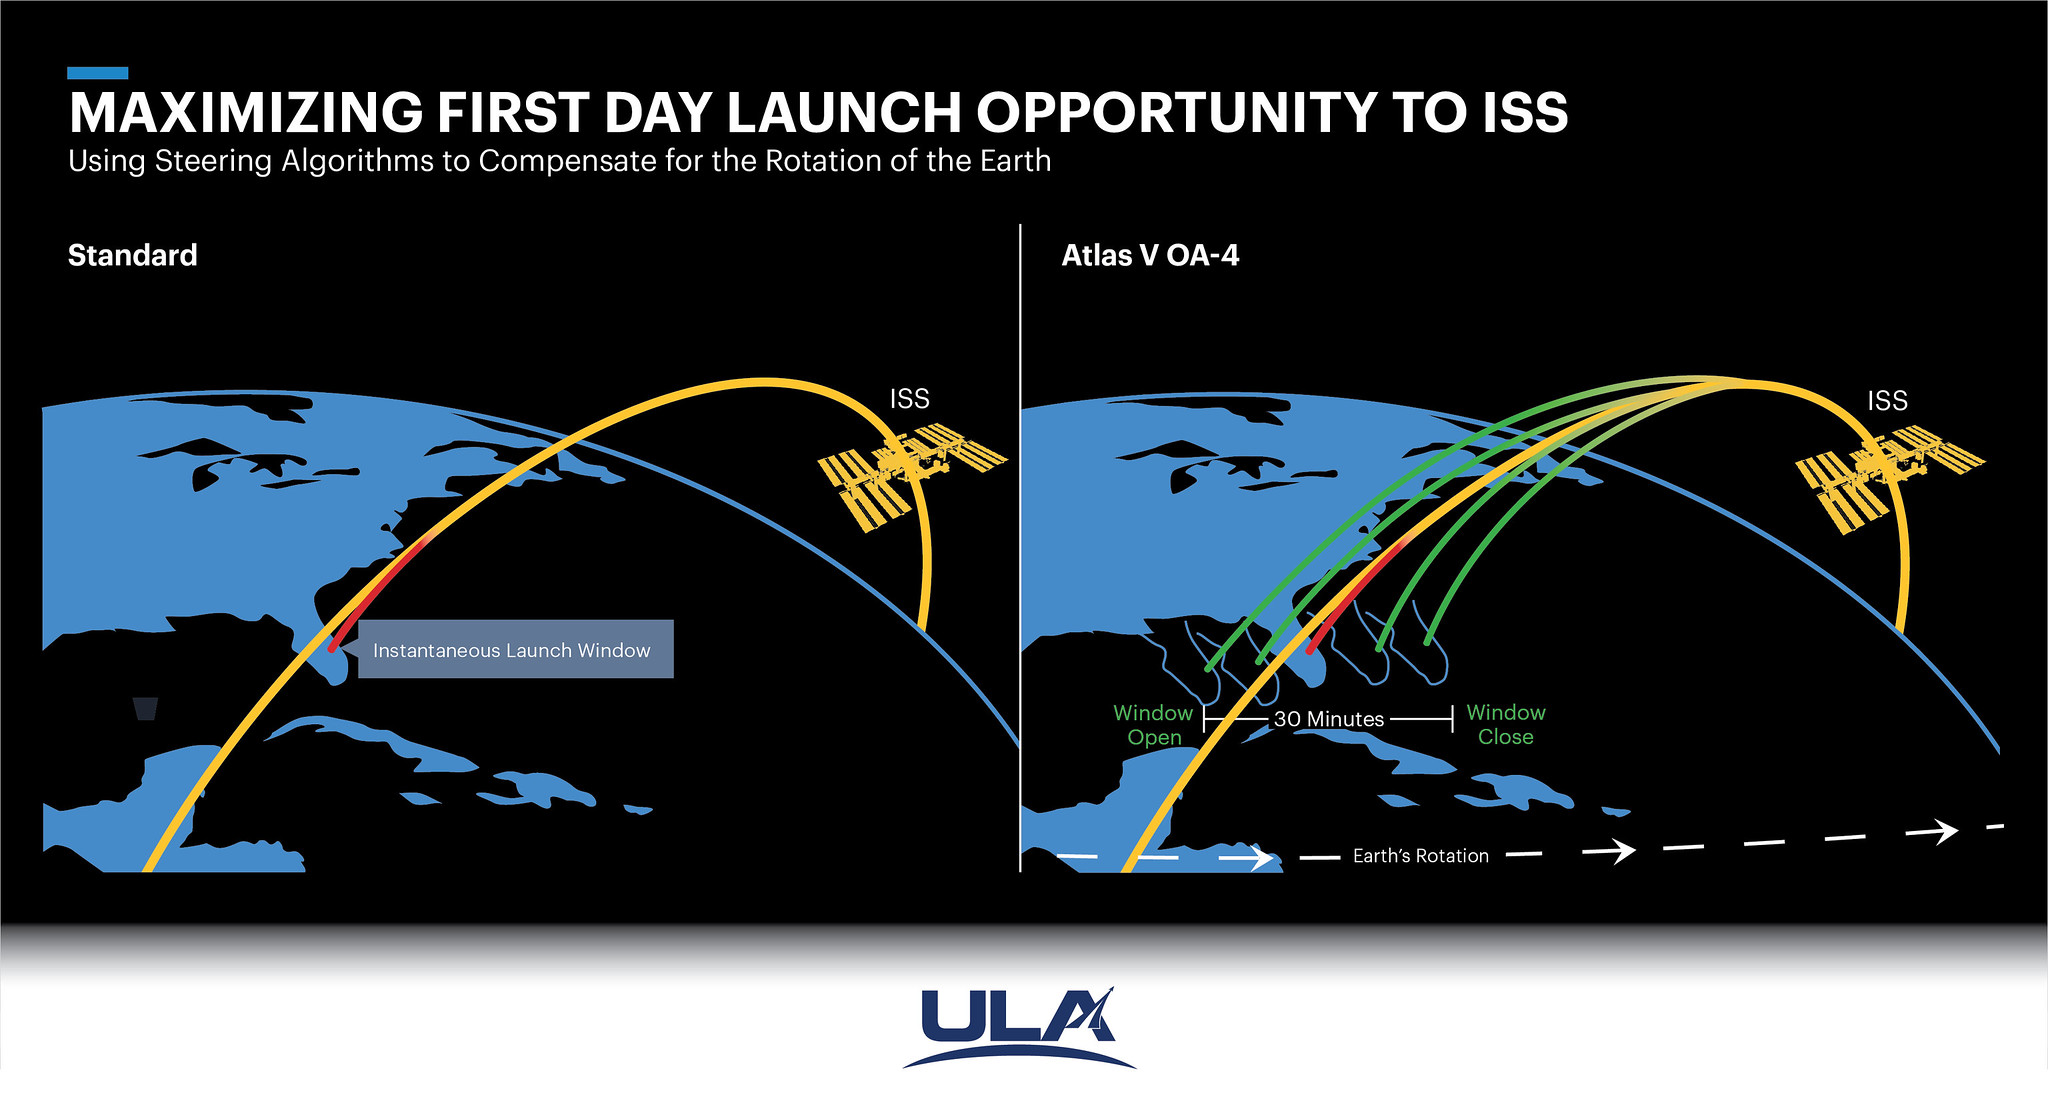 This ULA InfoGraphic depicts how RAAN steering enables wider launch windows to the International Space Station.